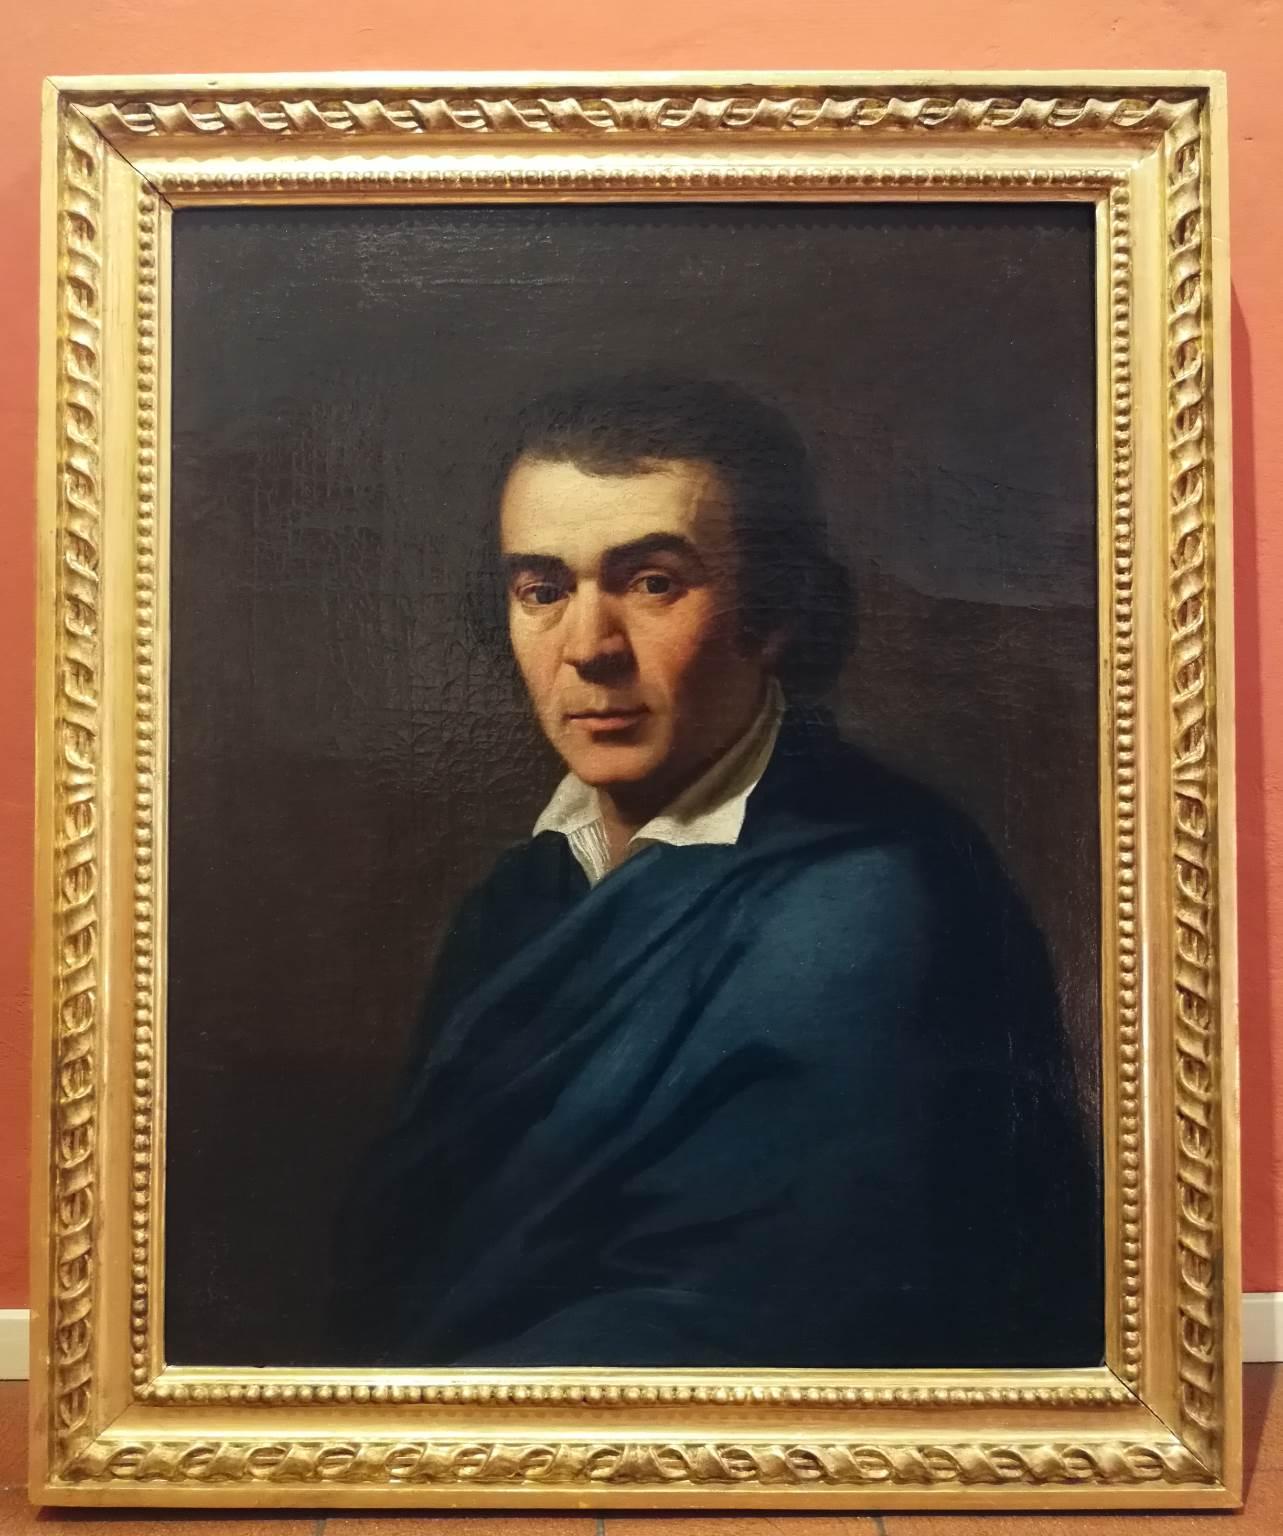 This portrait is extremely important in the reconstruction of the corpus and of the life of the artist thanks to a significant inscription on the back of the canvas that says “Ritratto di (?) Dom.° Anto. Camerini fatto in Roma l’An: 1784: da Gio.